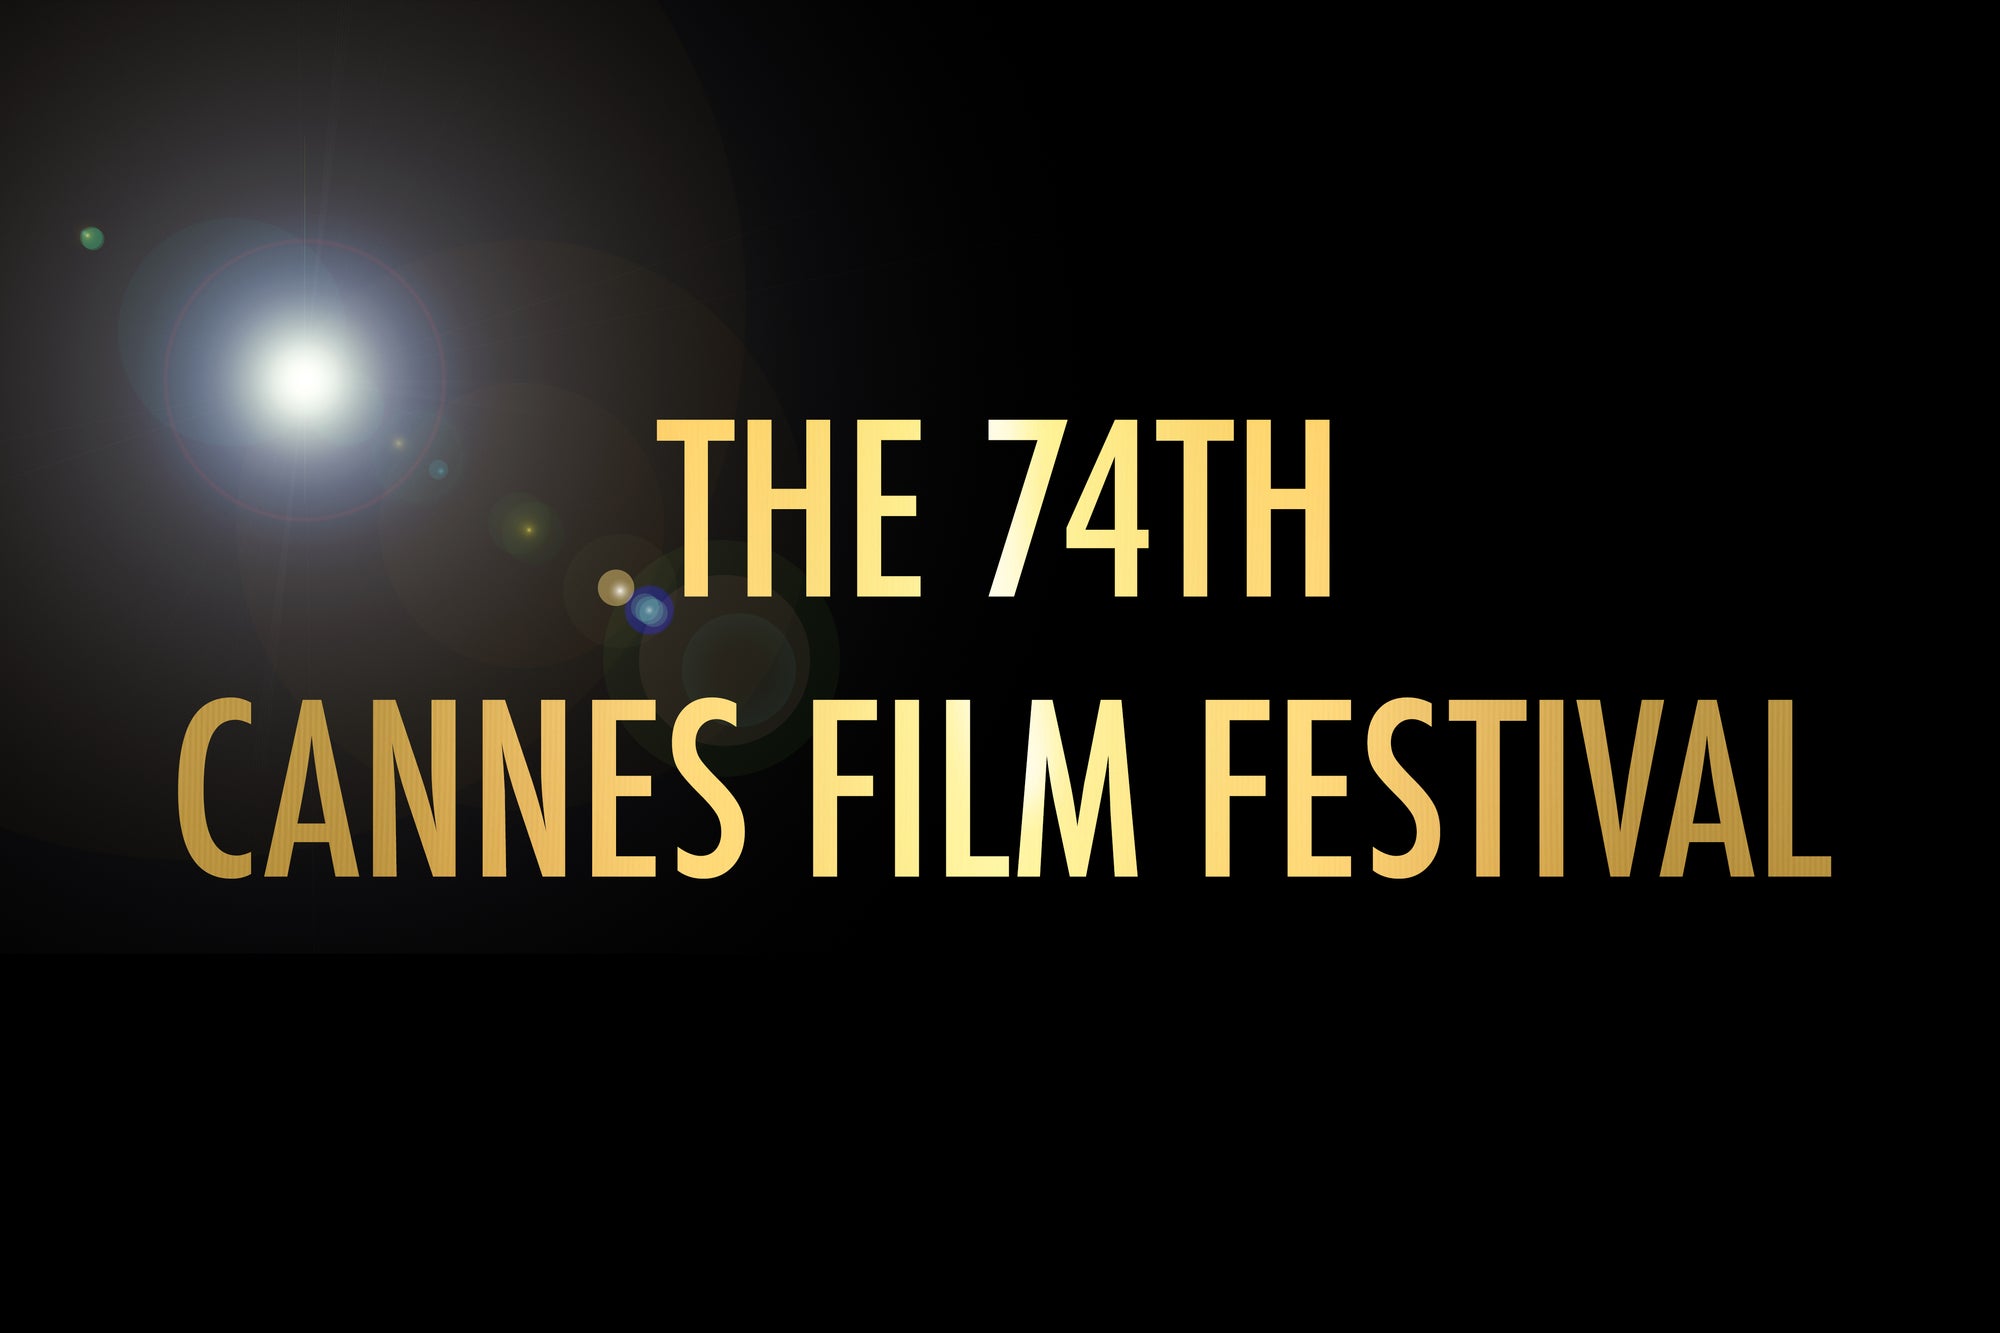 The 74th Annual Cannes Film Festival Red Carpet